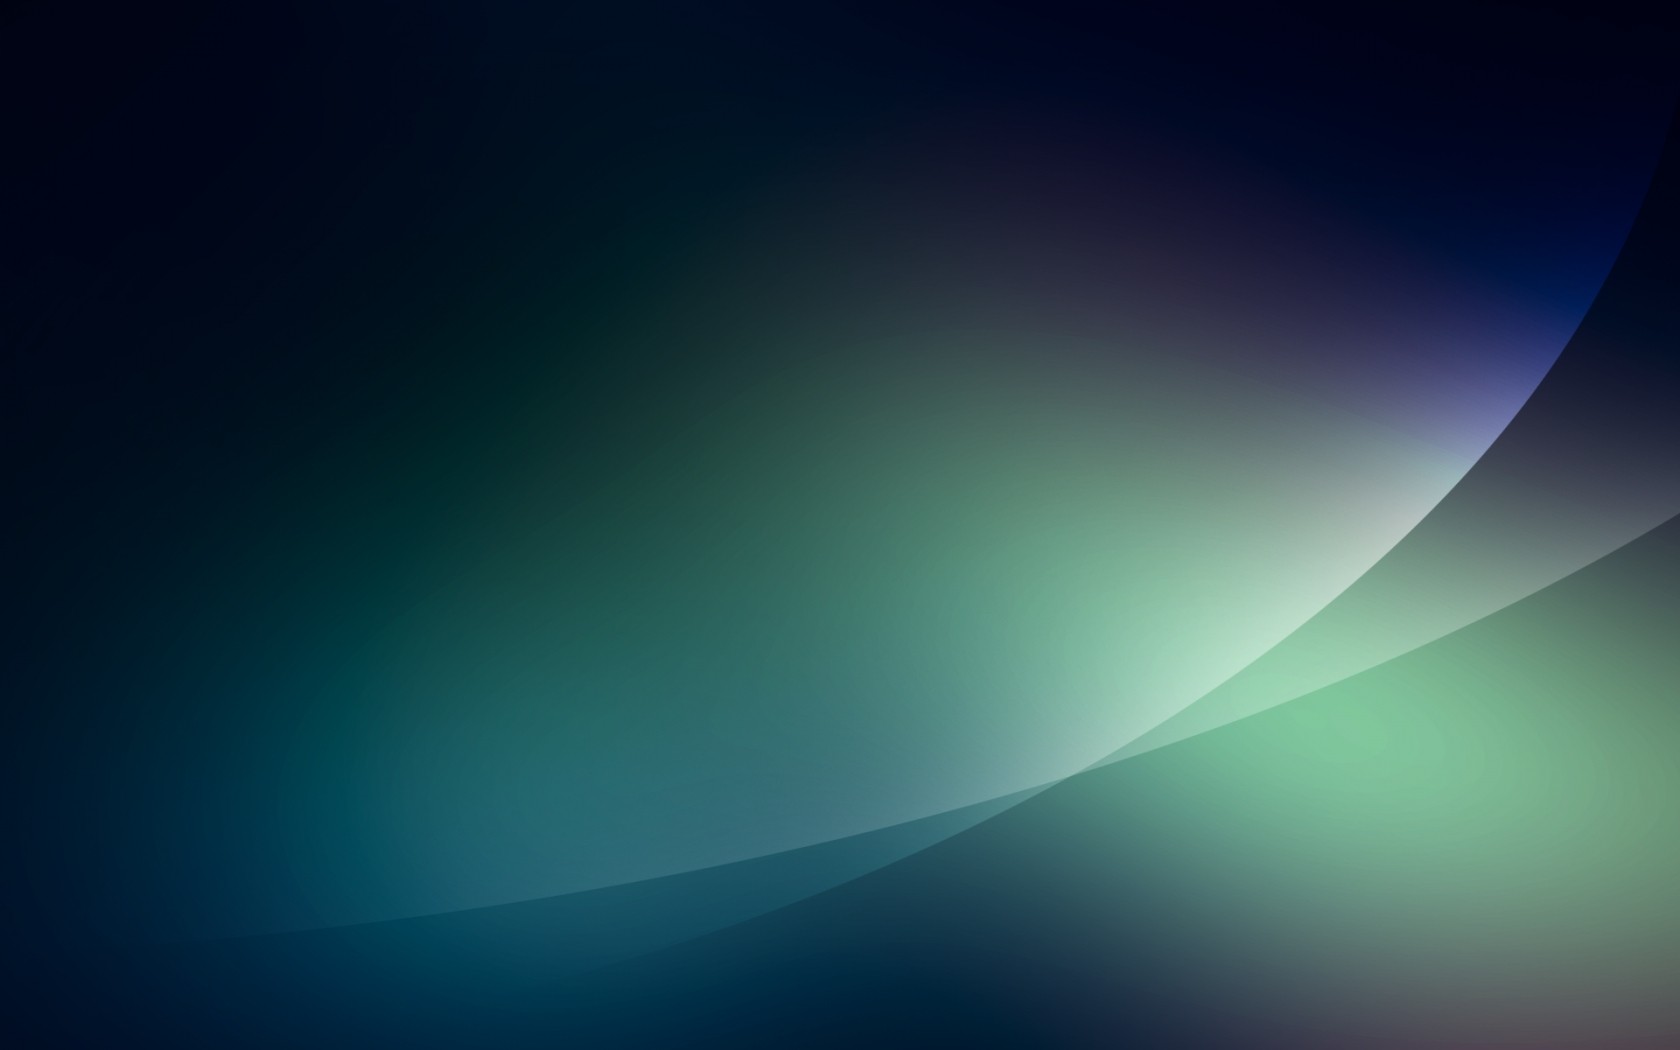 blue, Green, Lines, Linux, Windows 7 Wallpapers HD